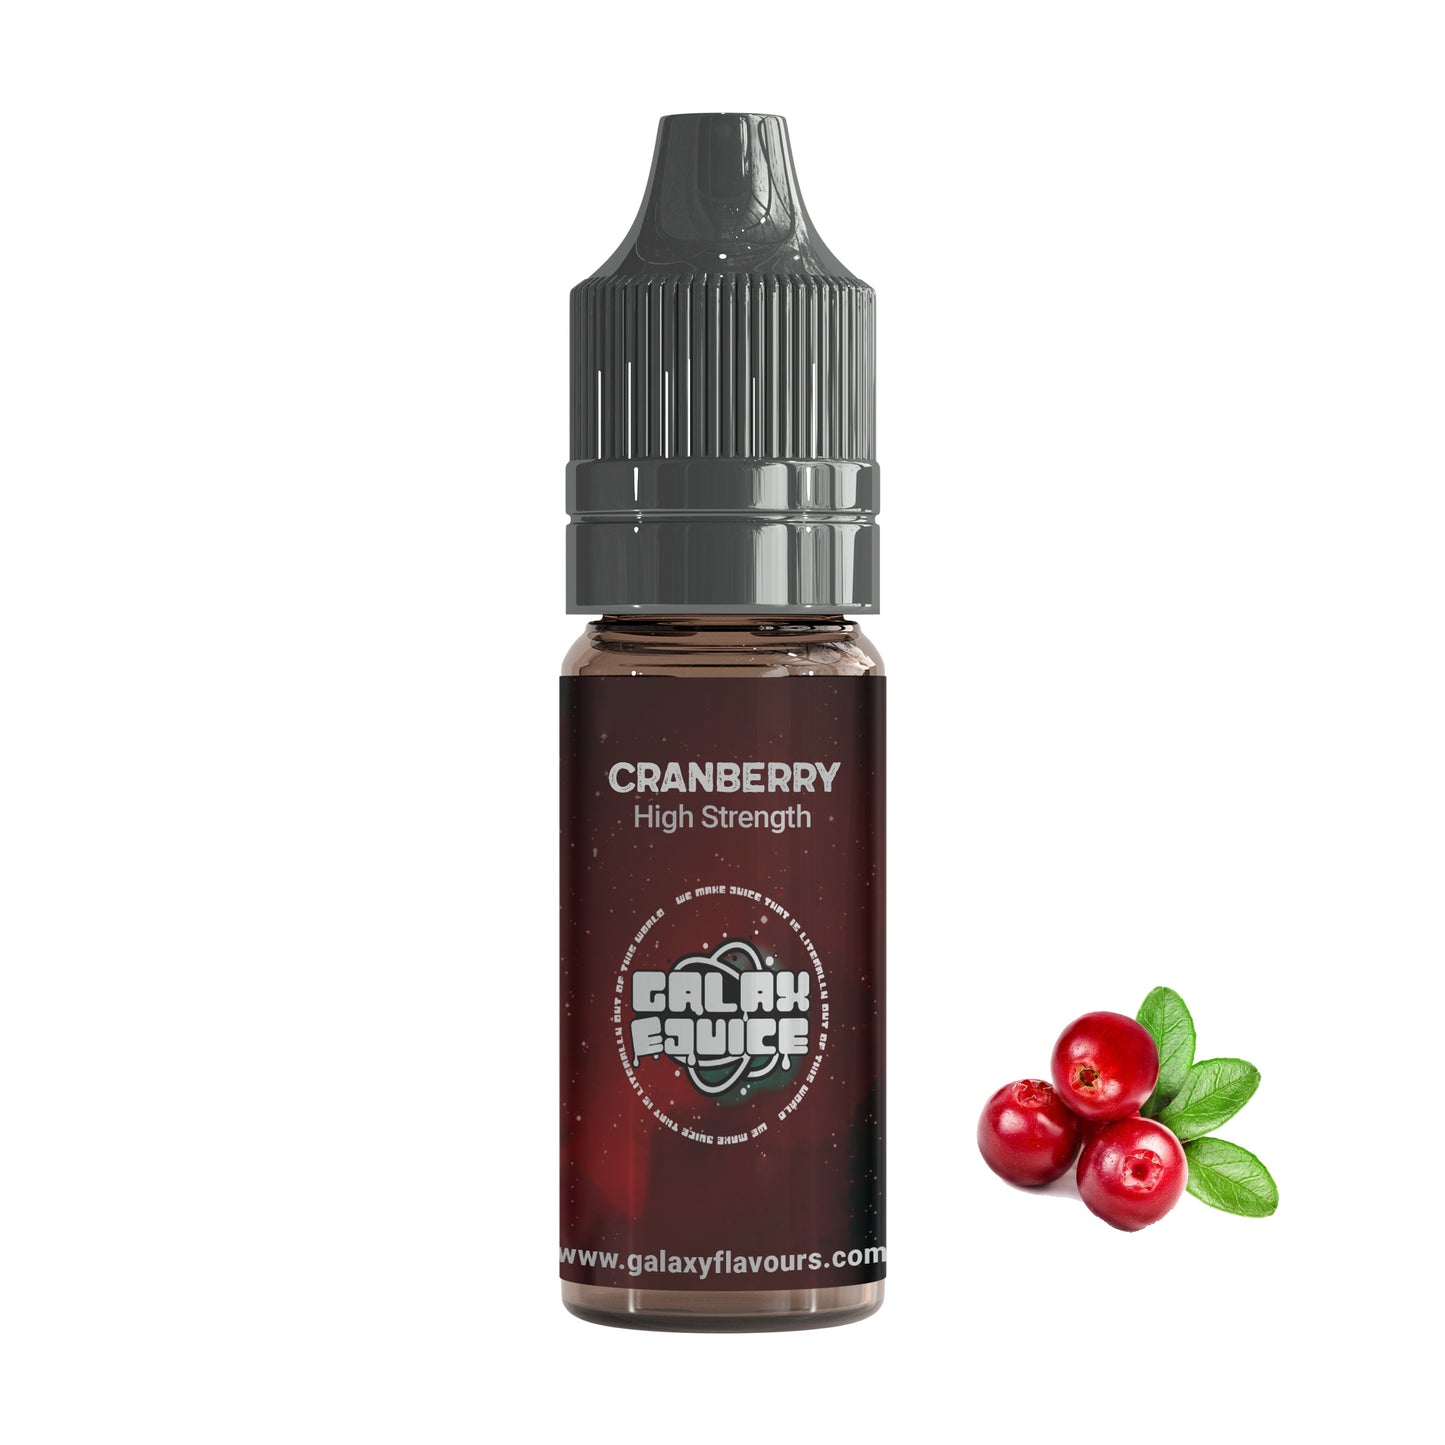 Cranberry High Strength Professional Flavouring.